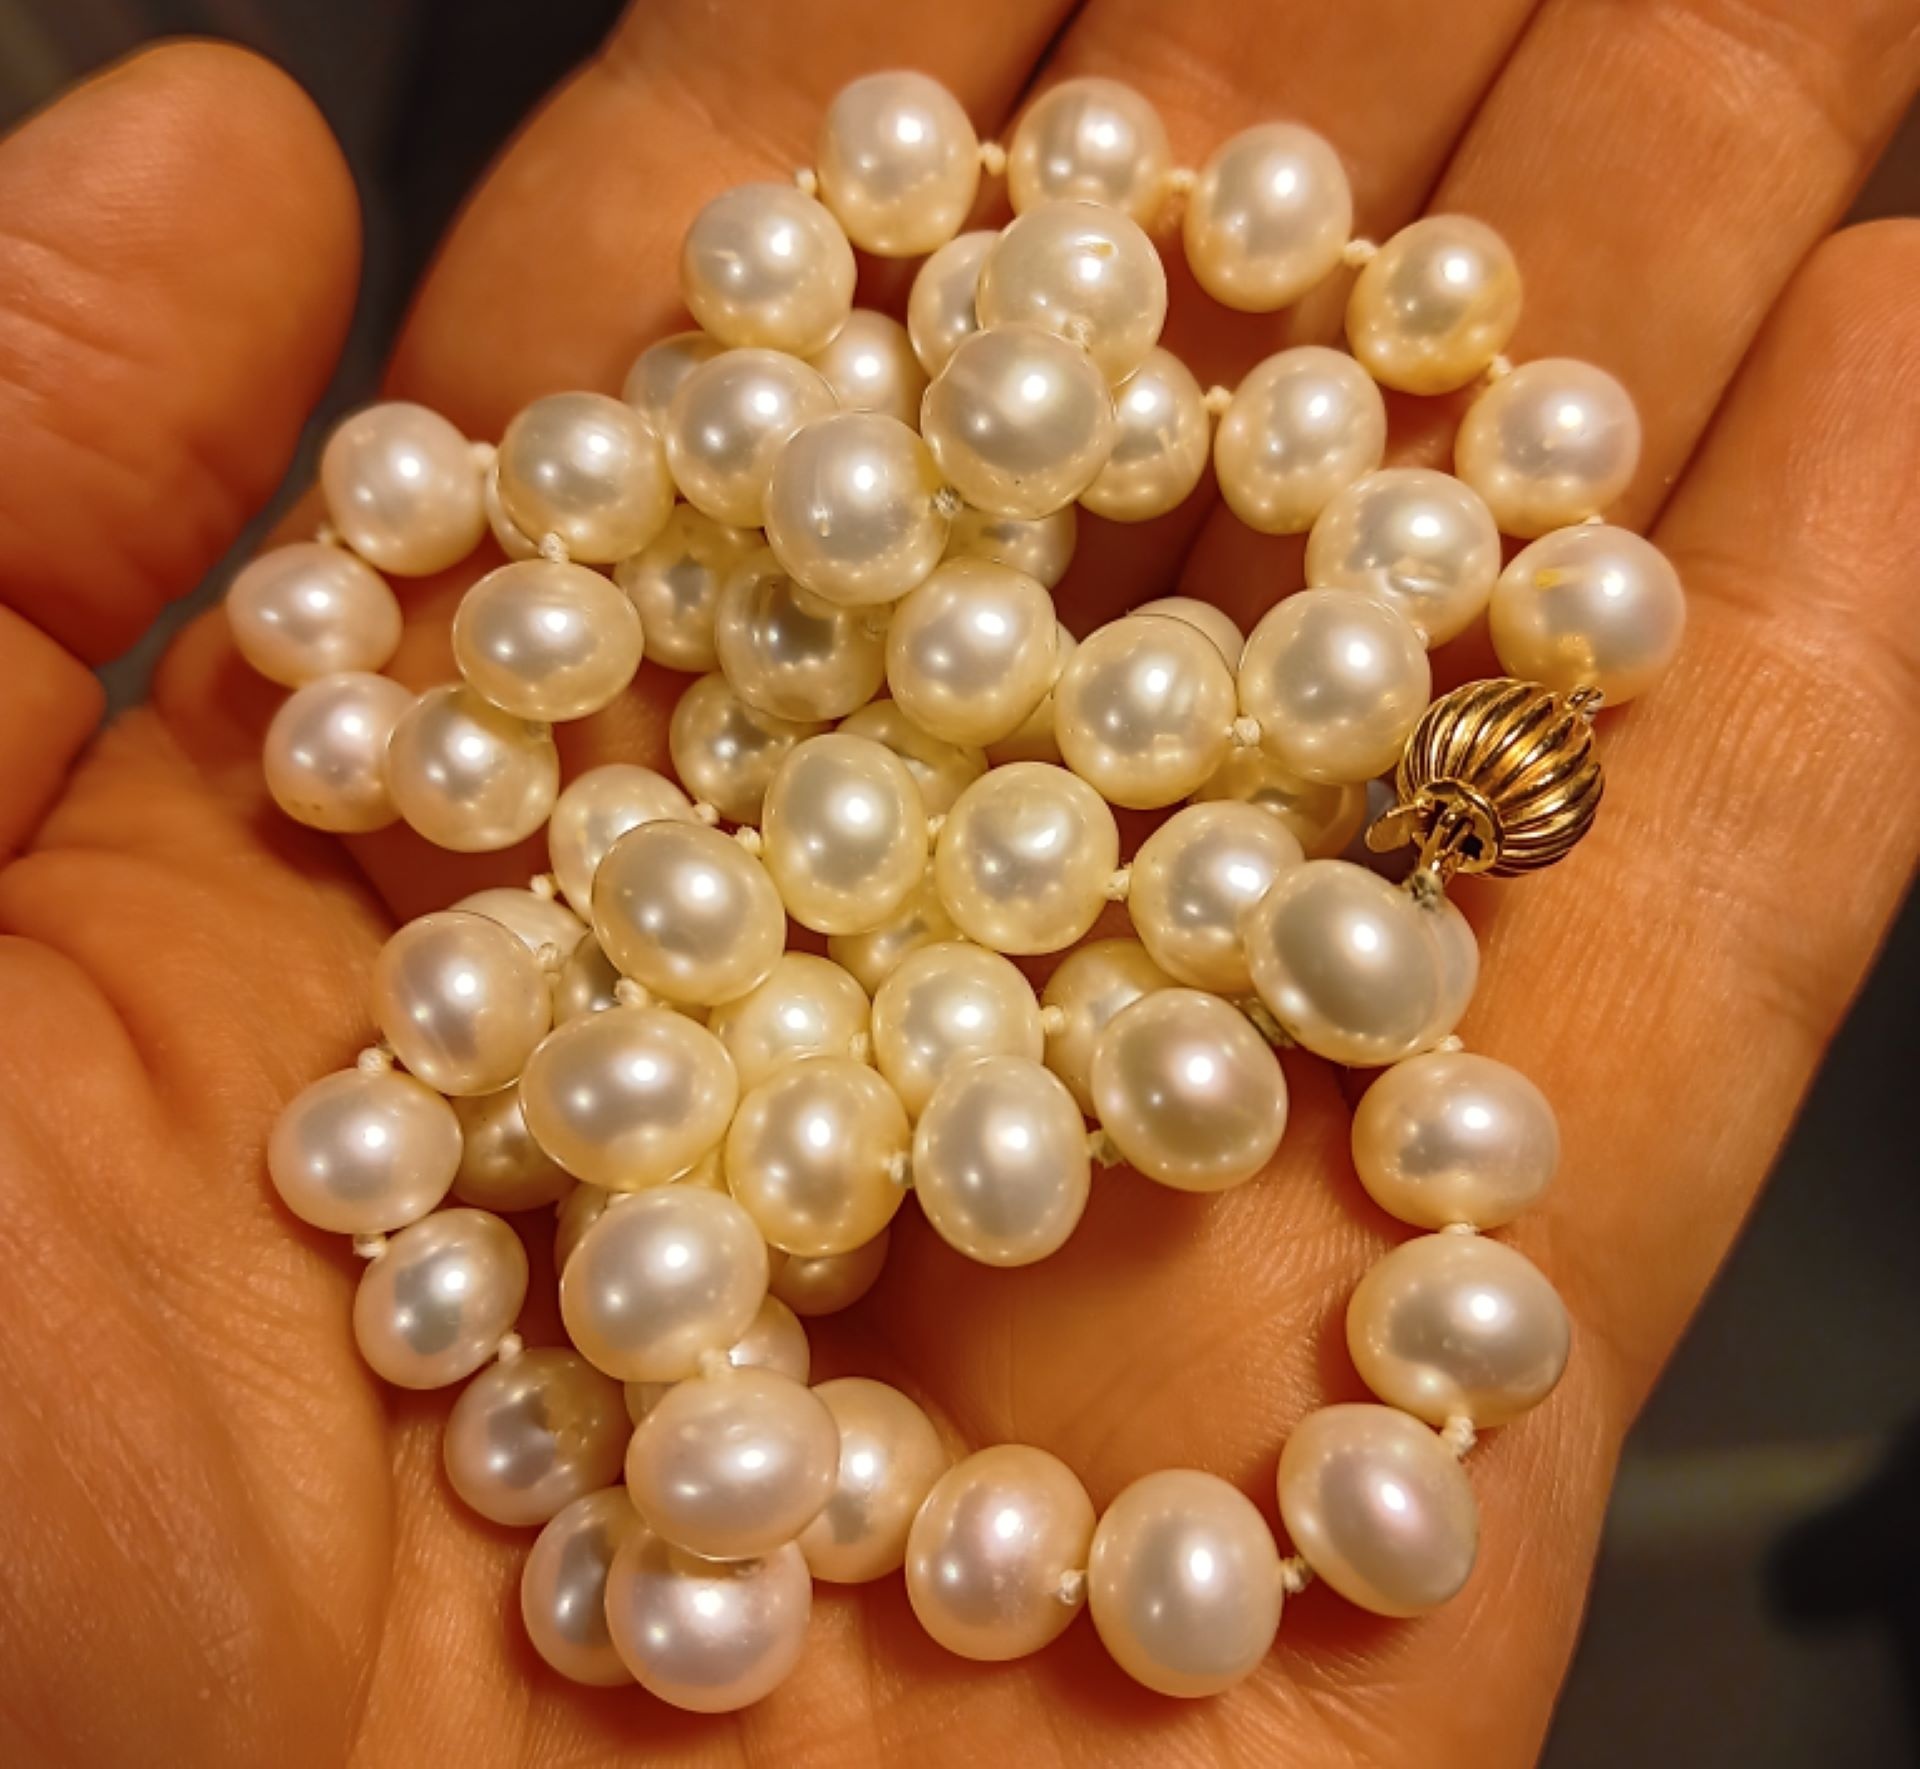 Fake Pearl Jewelry - Everything you need to know